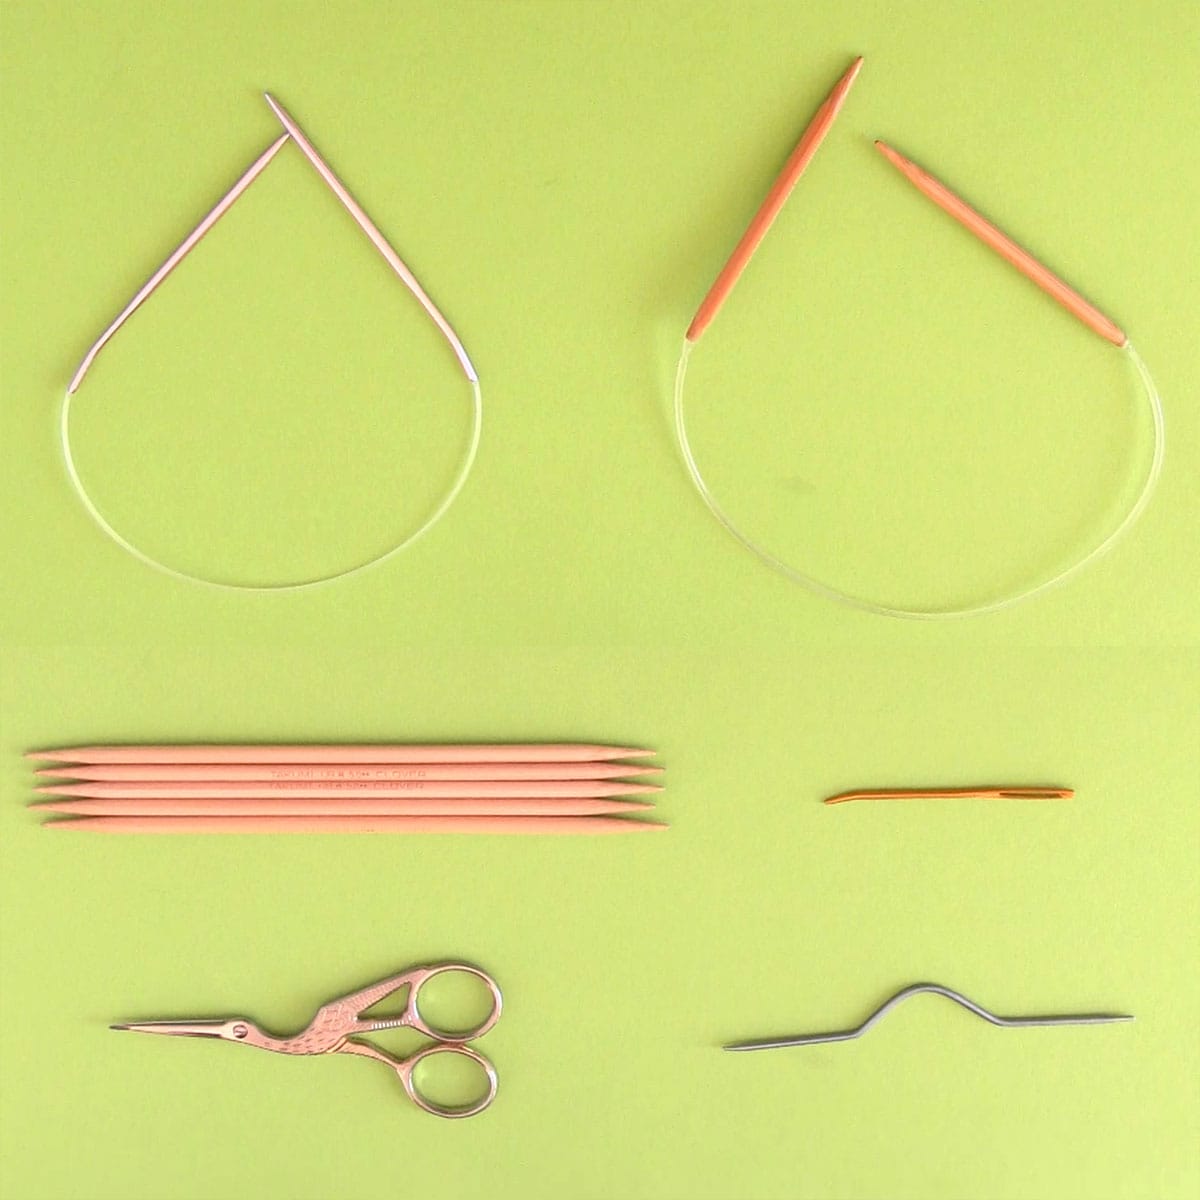 Knitting supplies with circular needles, double pointed needles, and cable needle.